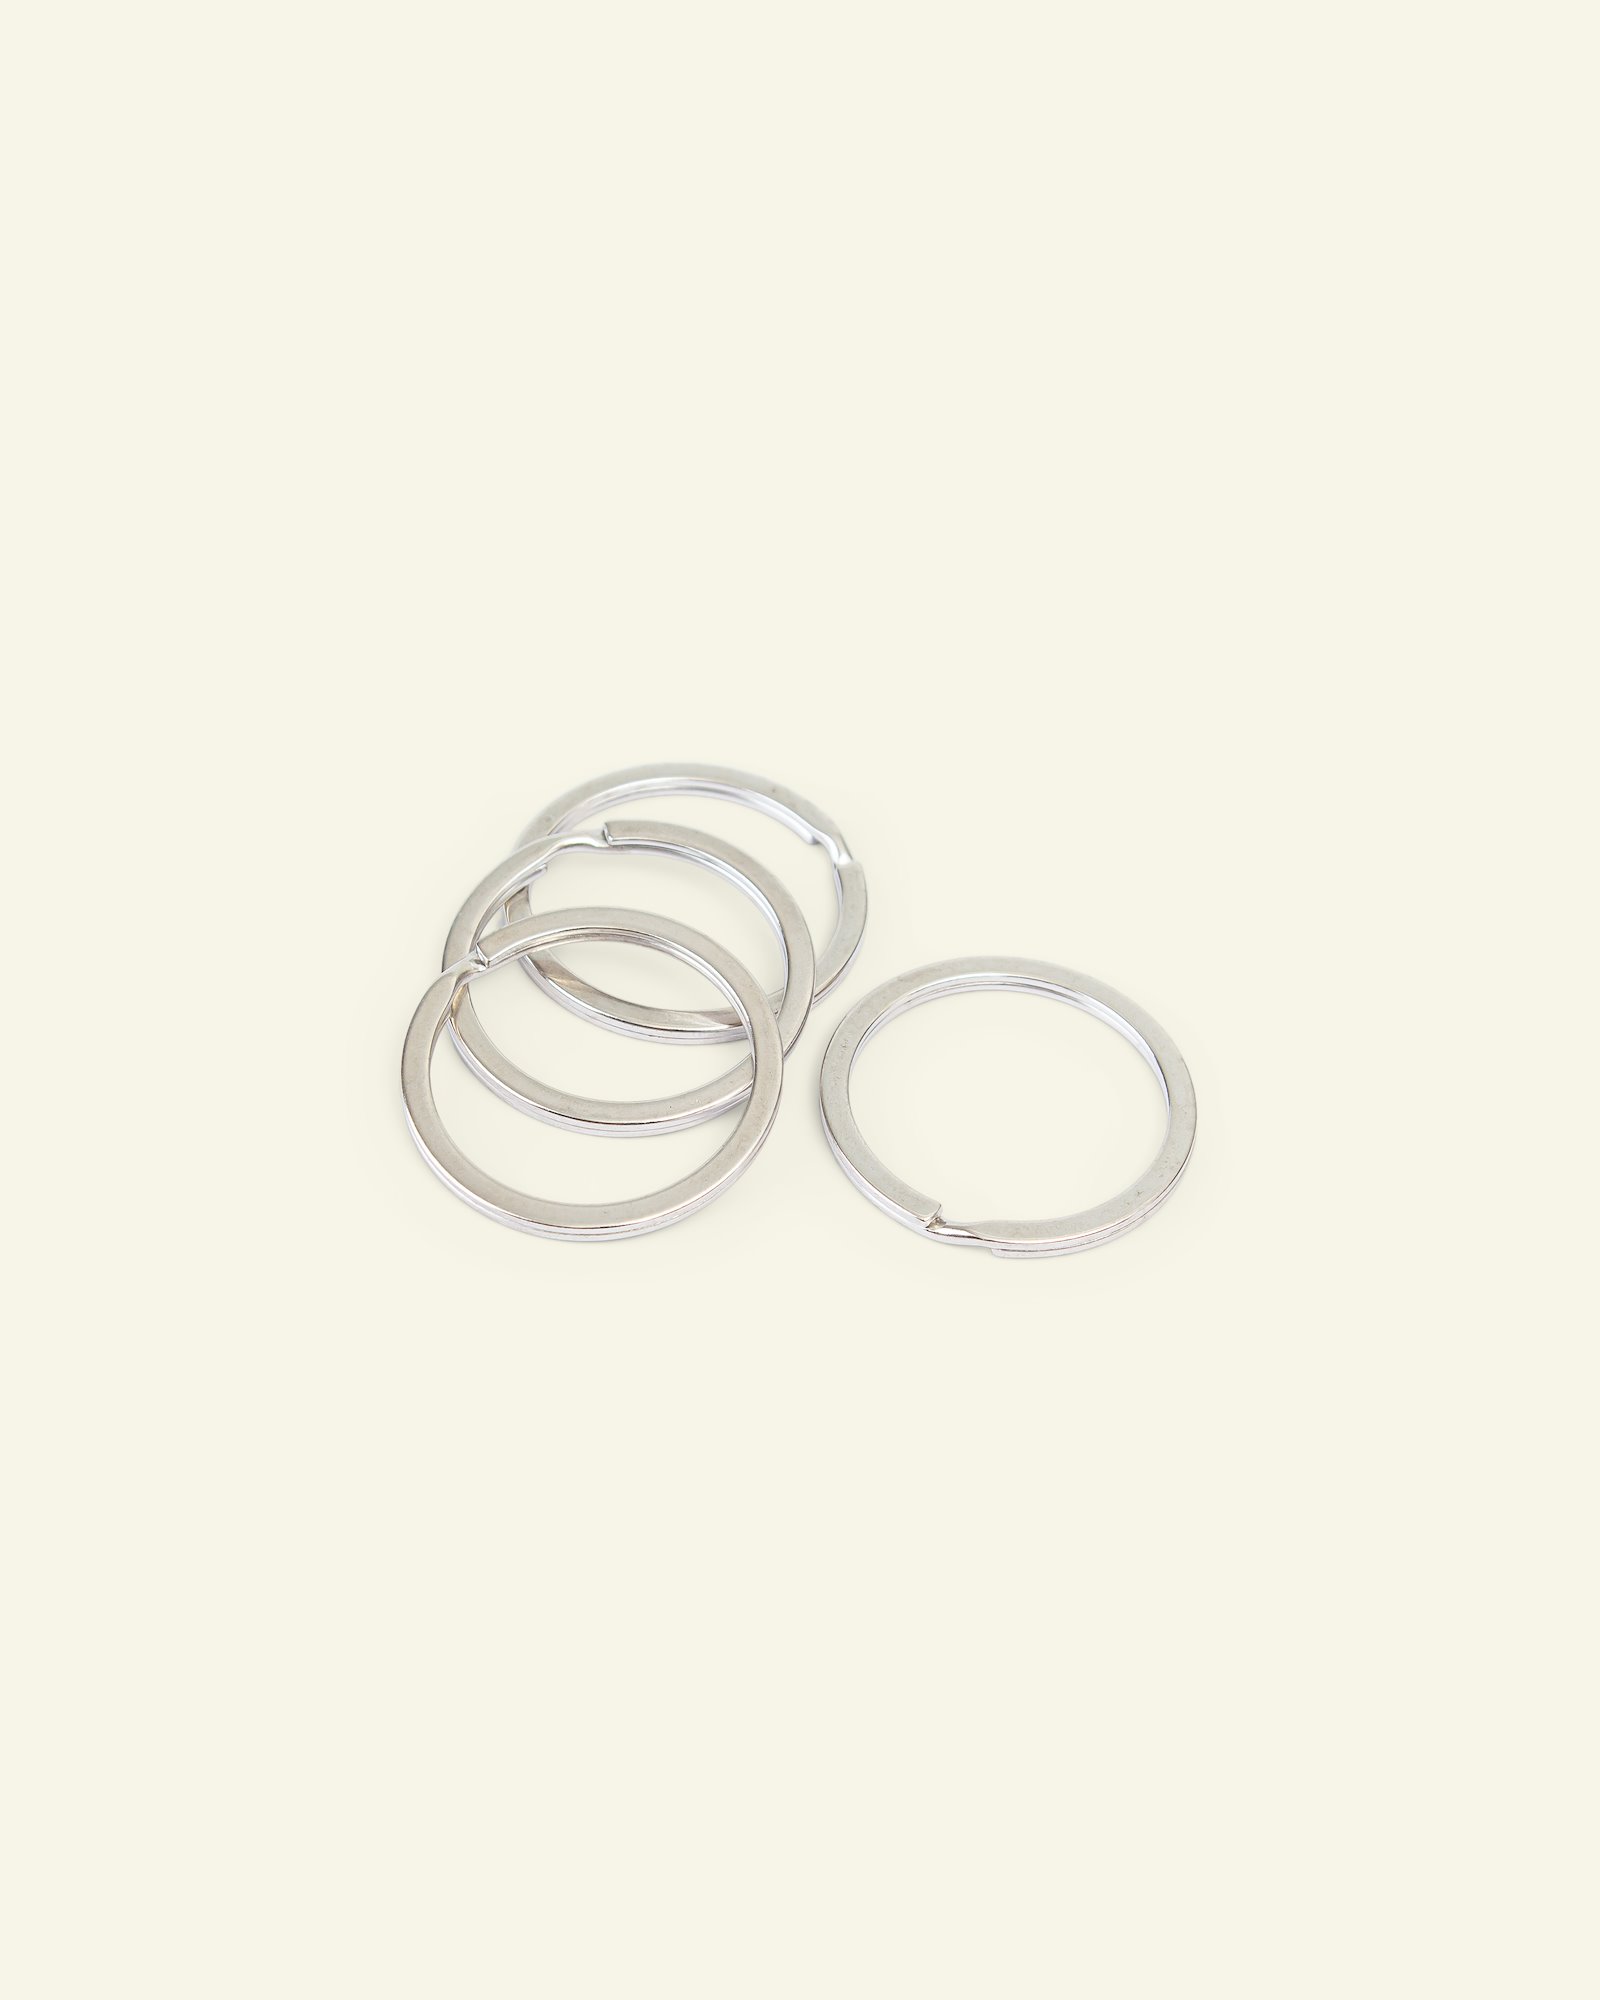 Nyckelring metall 35/30mm silver 4st 45702_pack